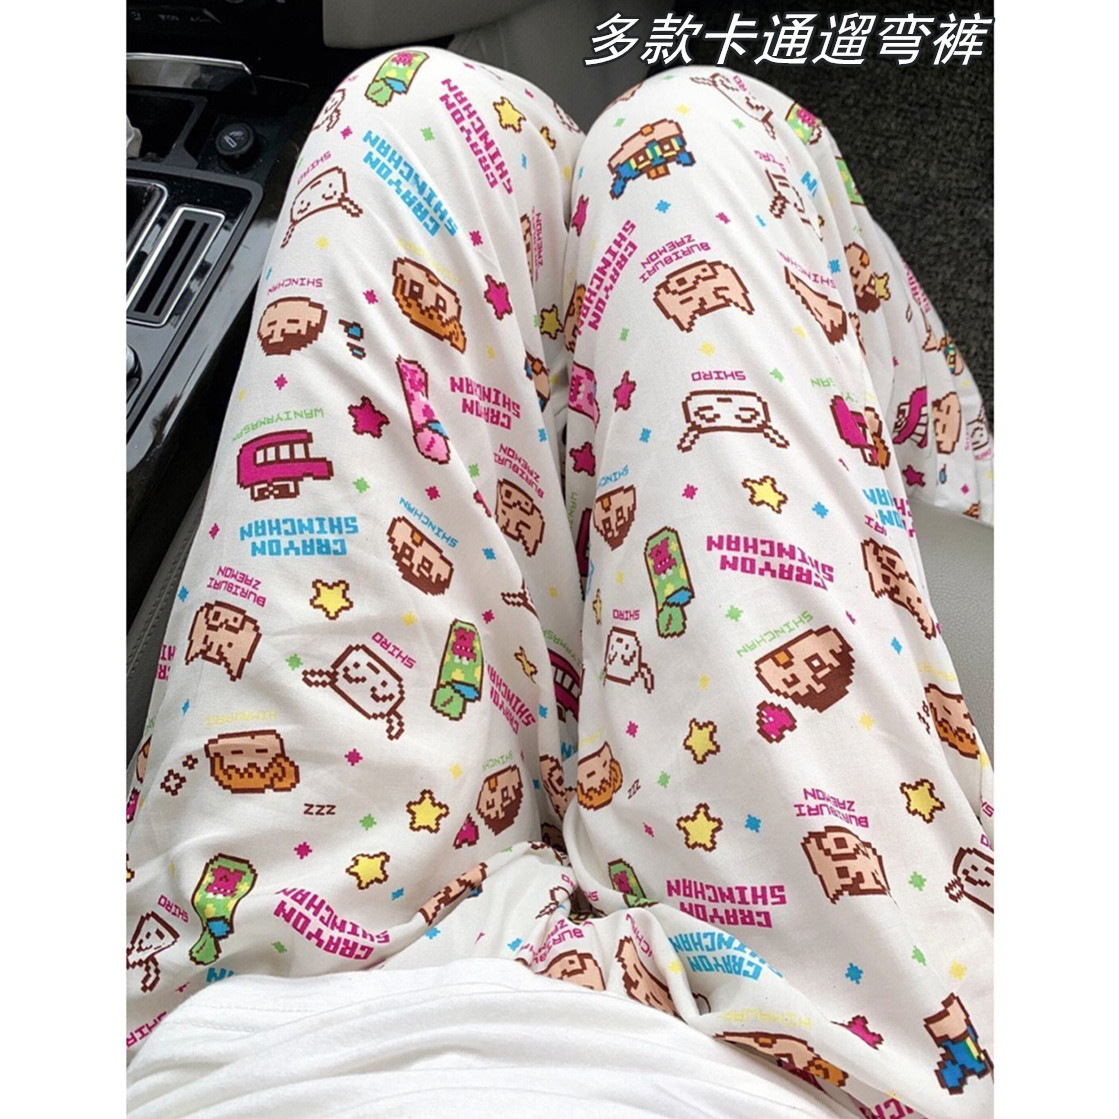 Walking Contraction Trouser New Cartoon Pajama Pants Women's Spring and Summer Thin Home Lazypants Straight Casual Pants Women's Outer Wear Women's Pants Fashion